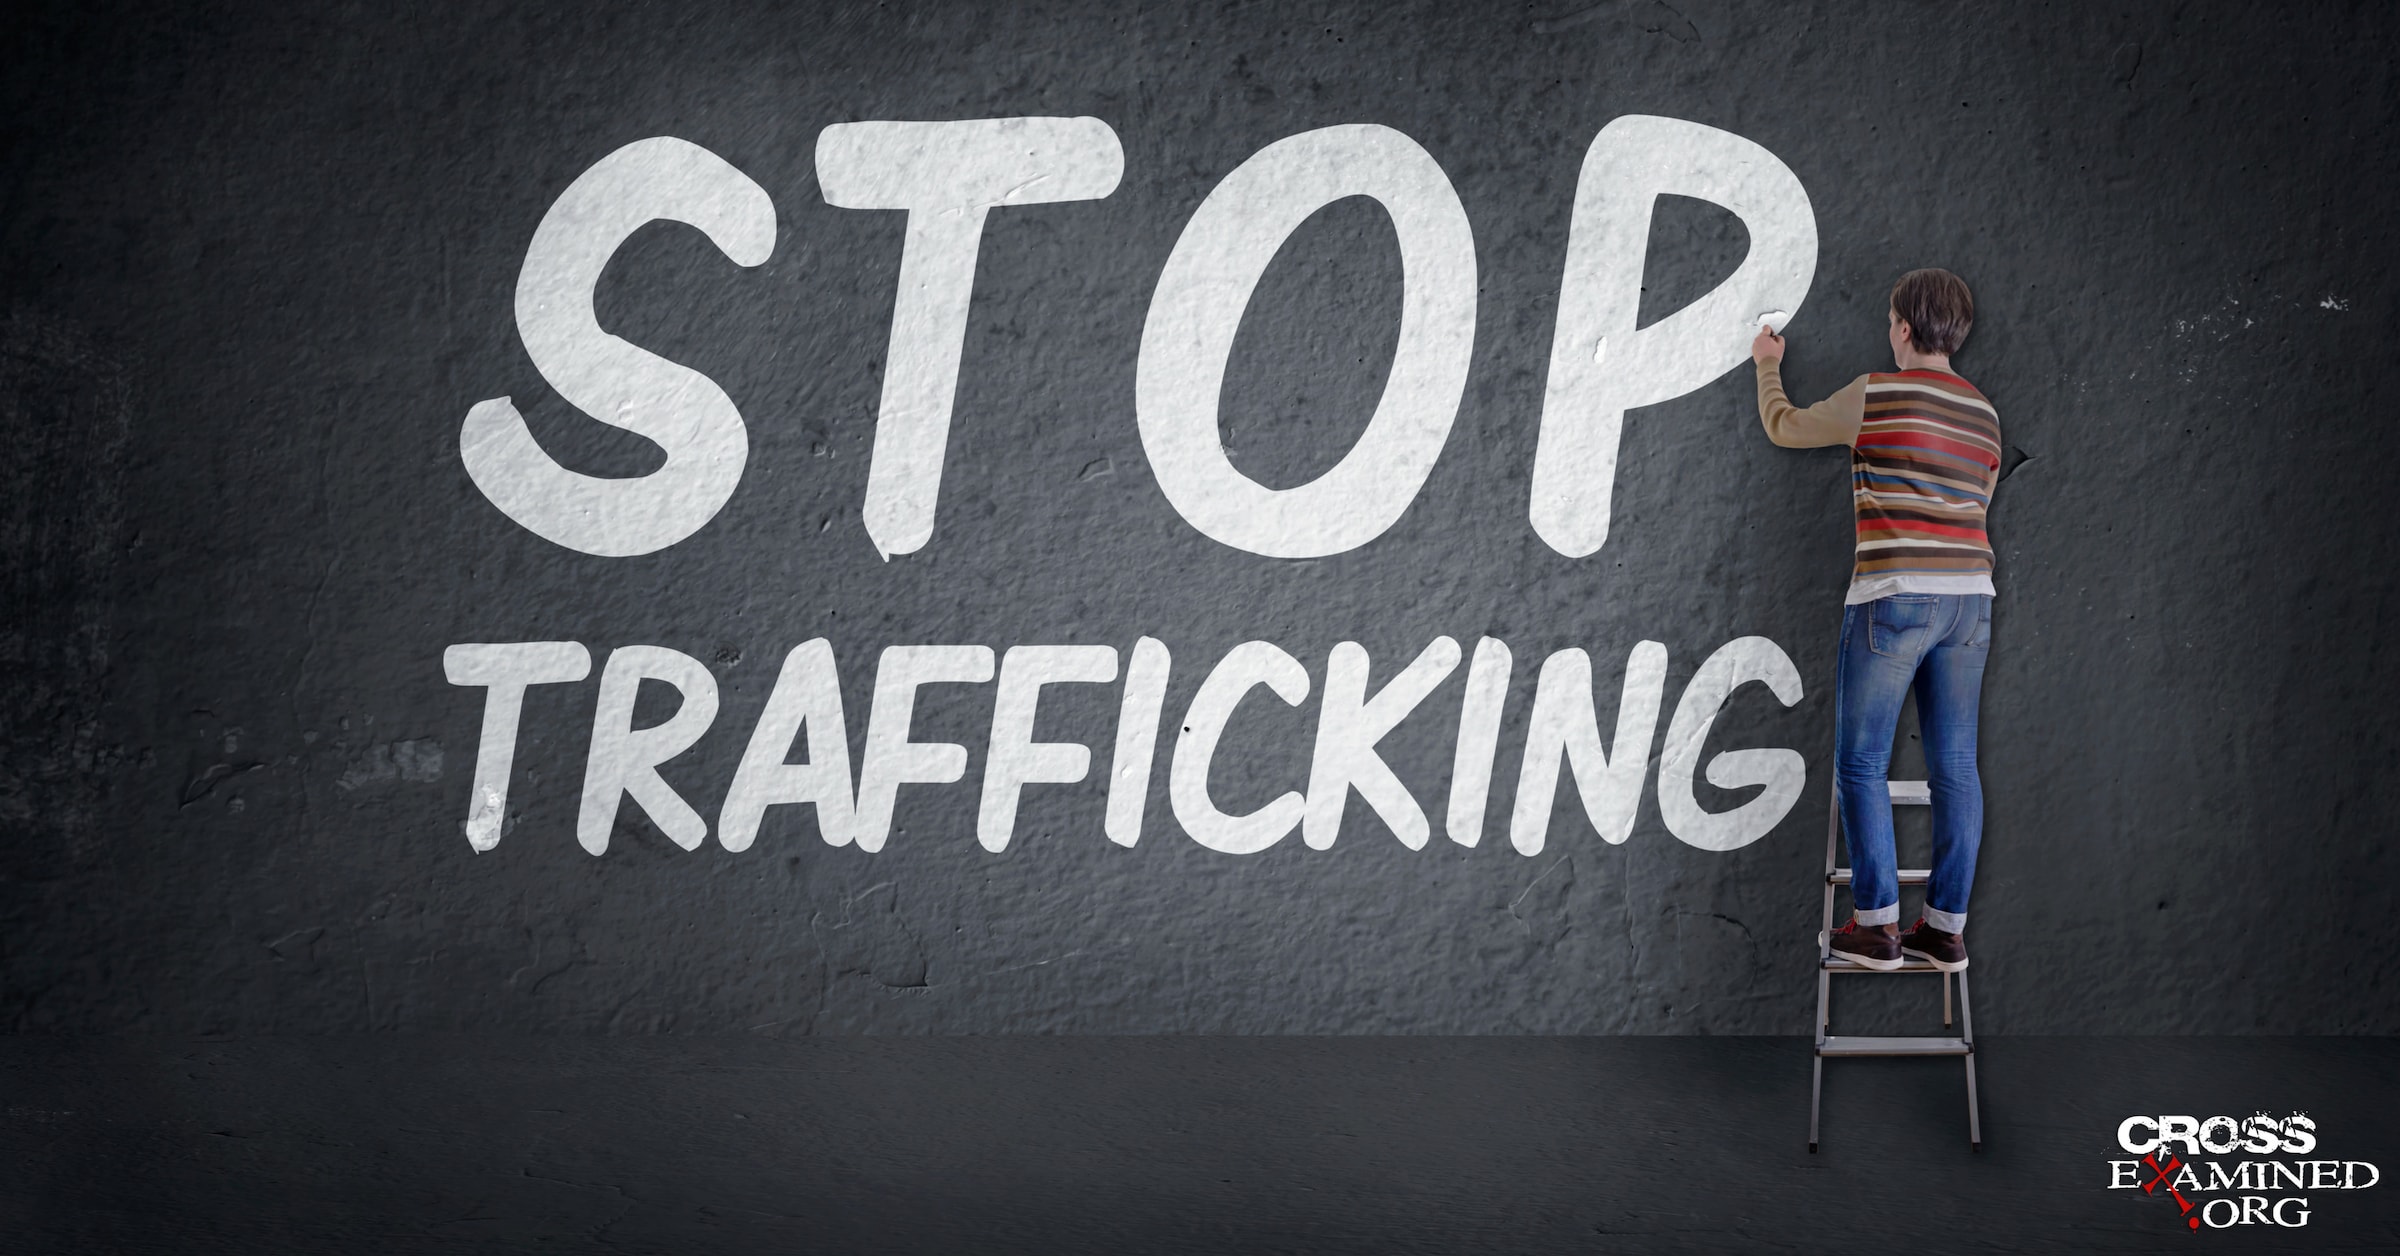 Fighting Human Trafficking in the Digital Age